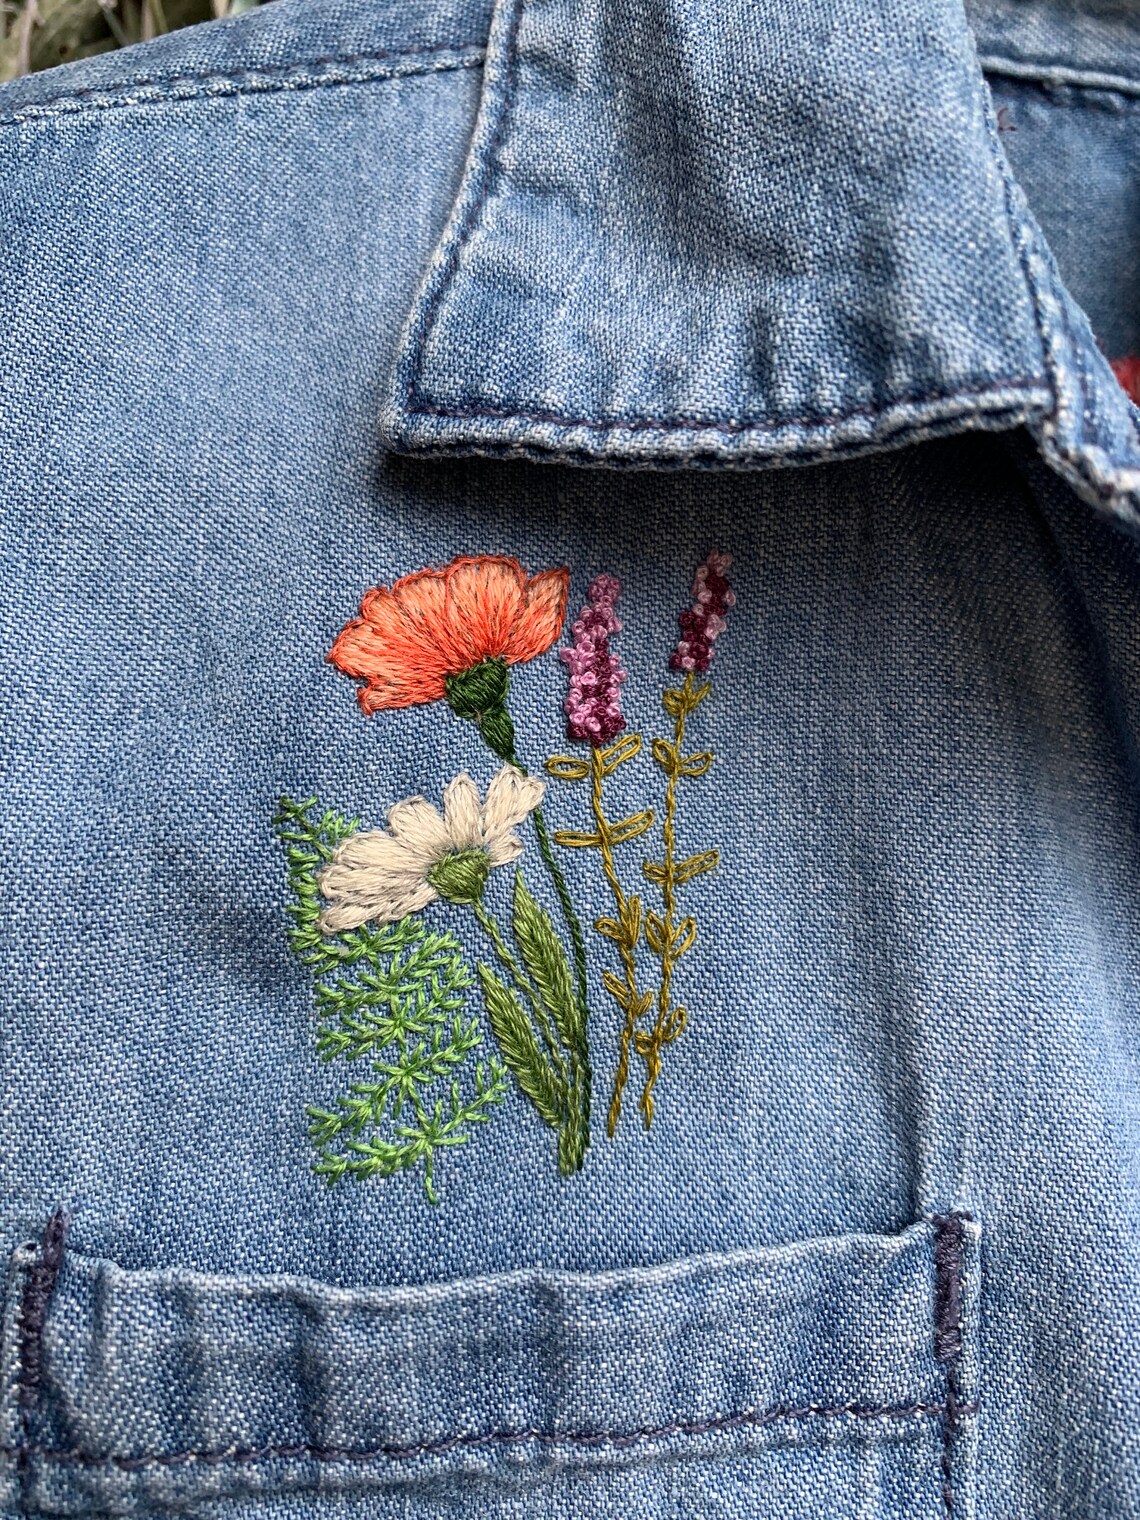 Denim/chambray Dress 4/5 Toddler Hand-embroidered Flowers - Etsy